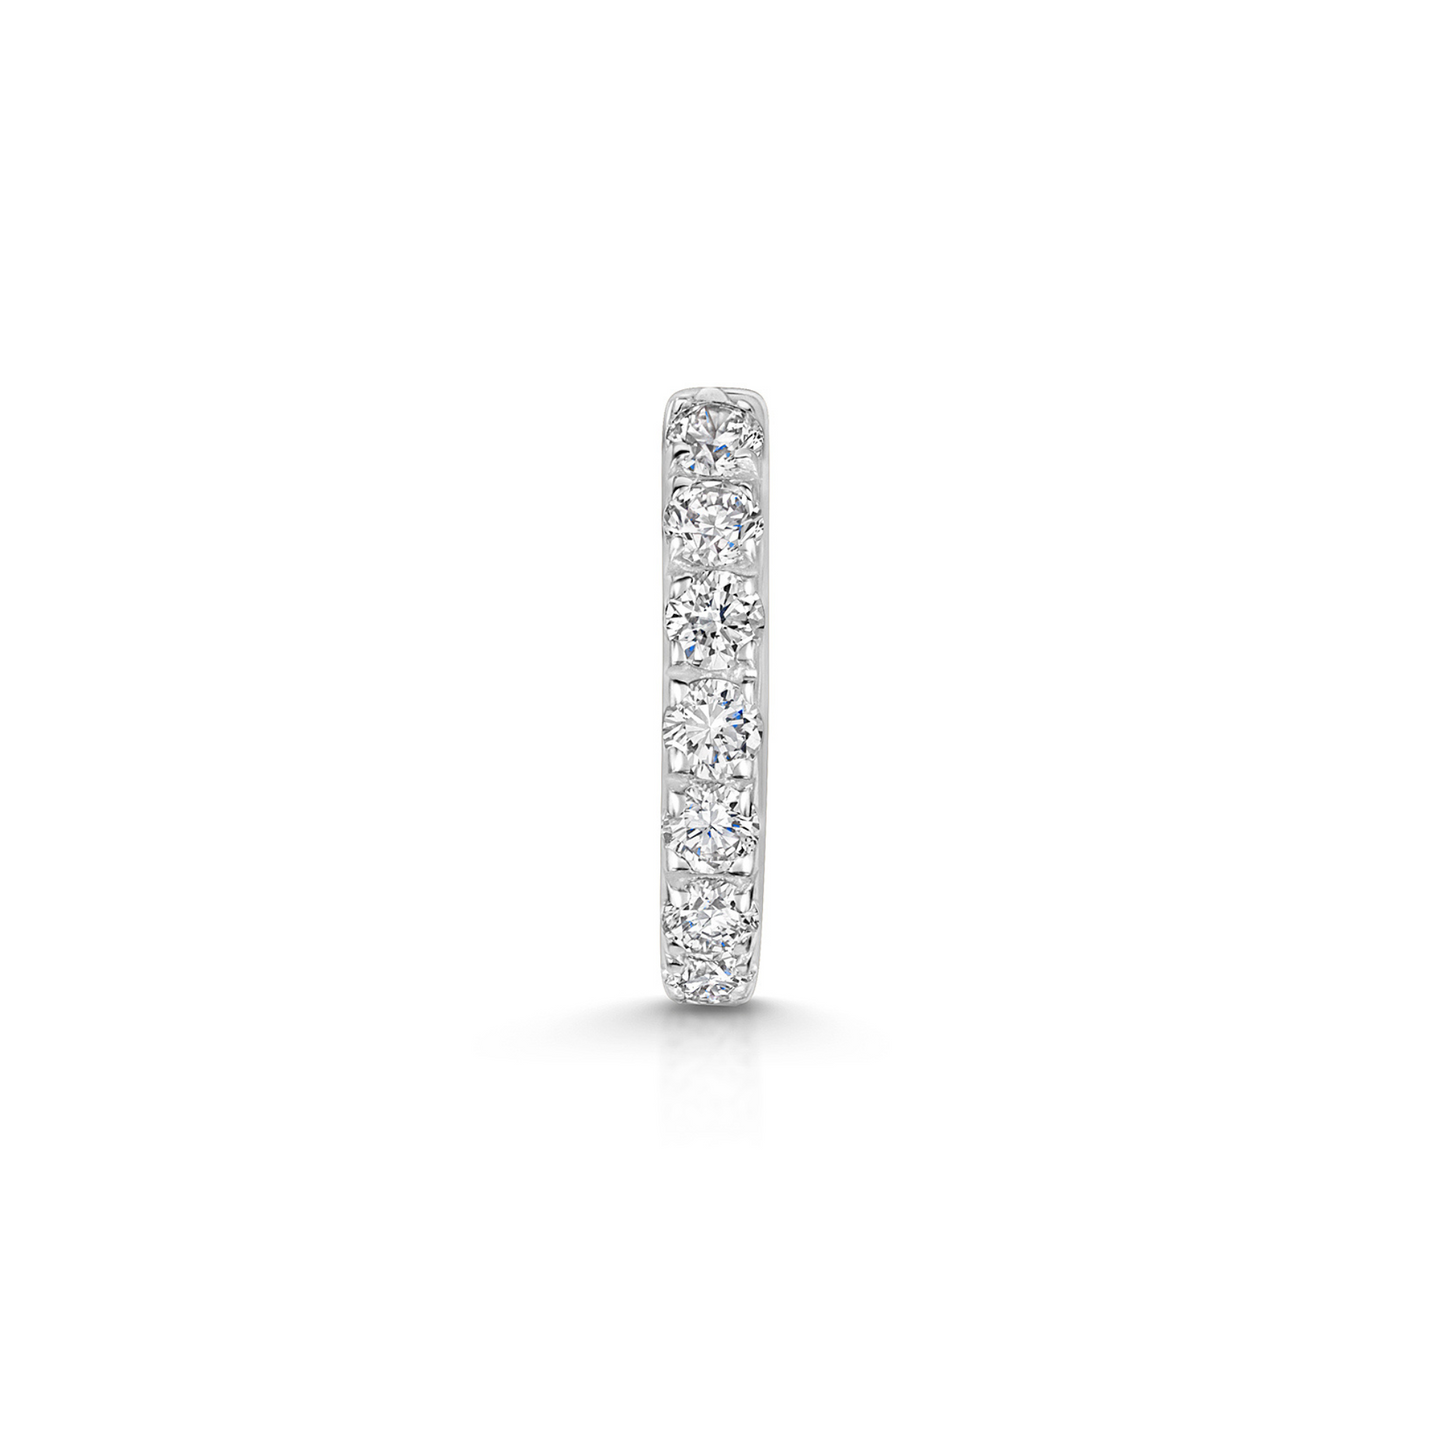 9k solid white gold 10mm simple crystal huggie earring